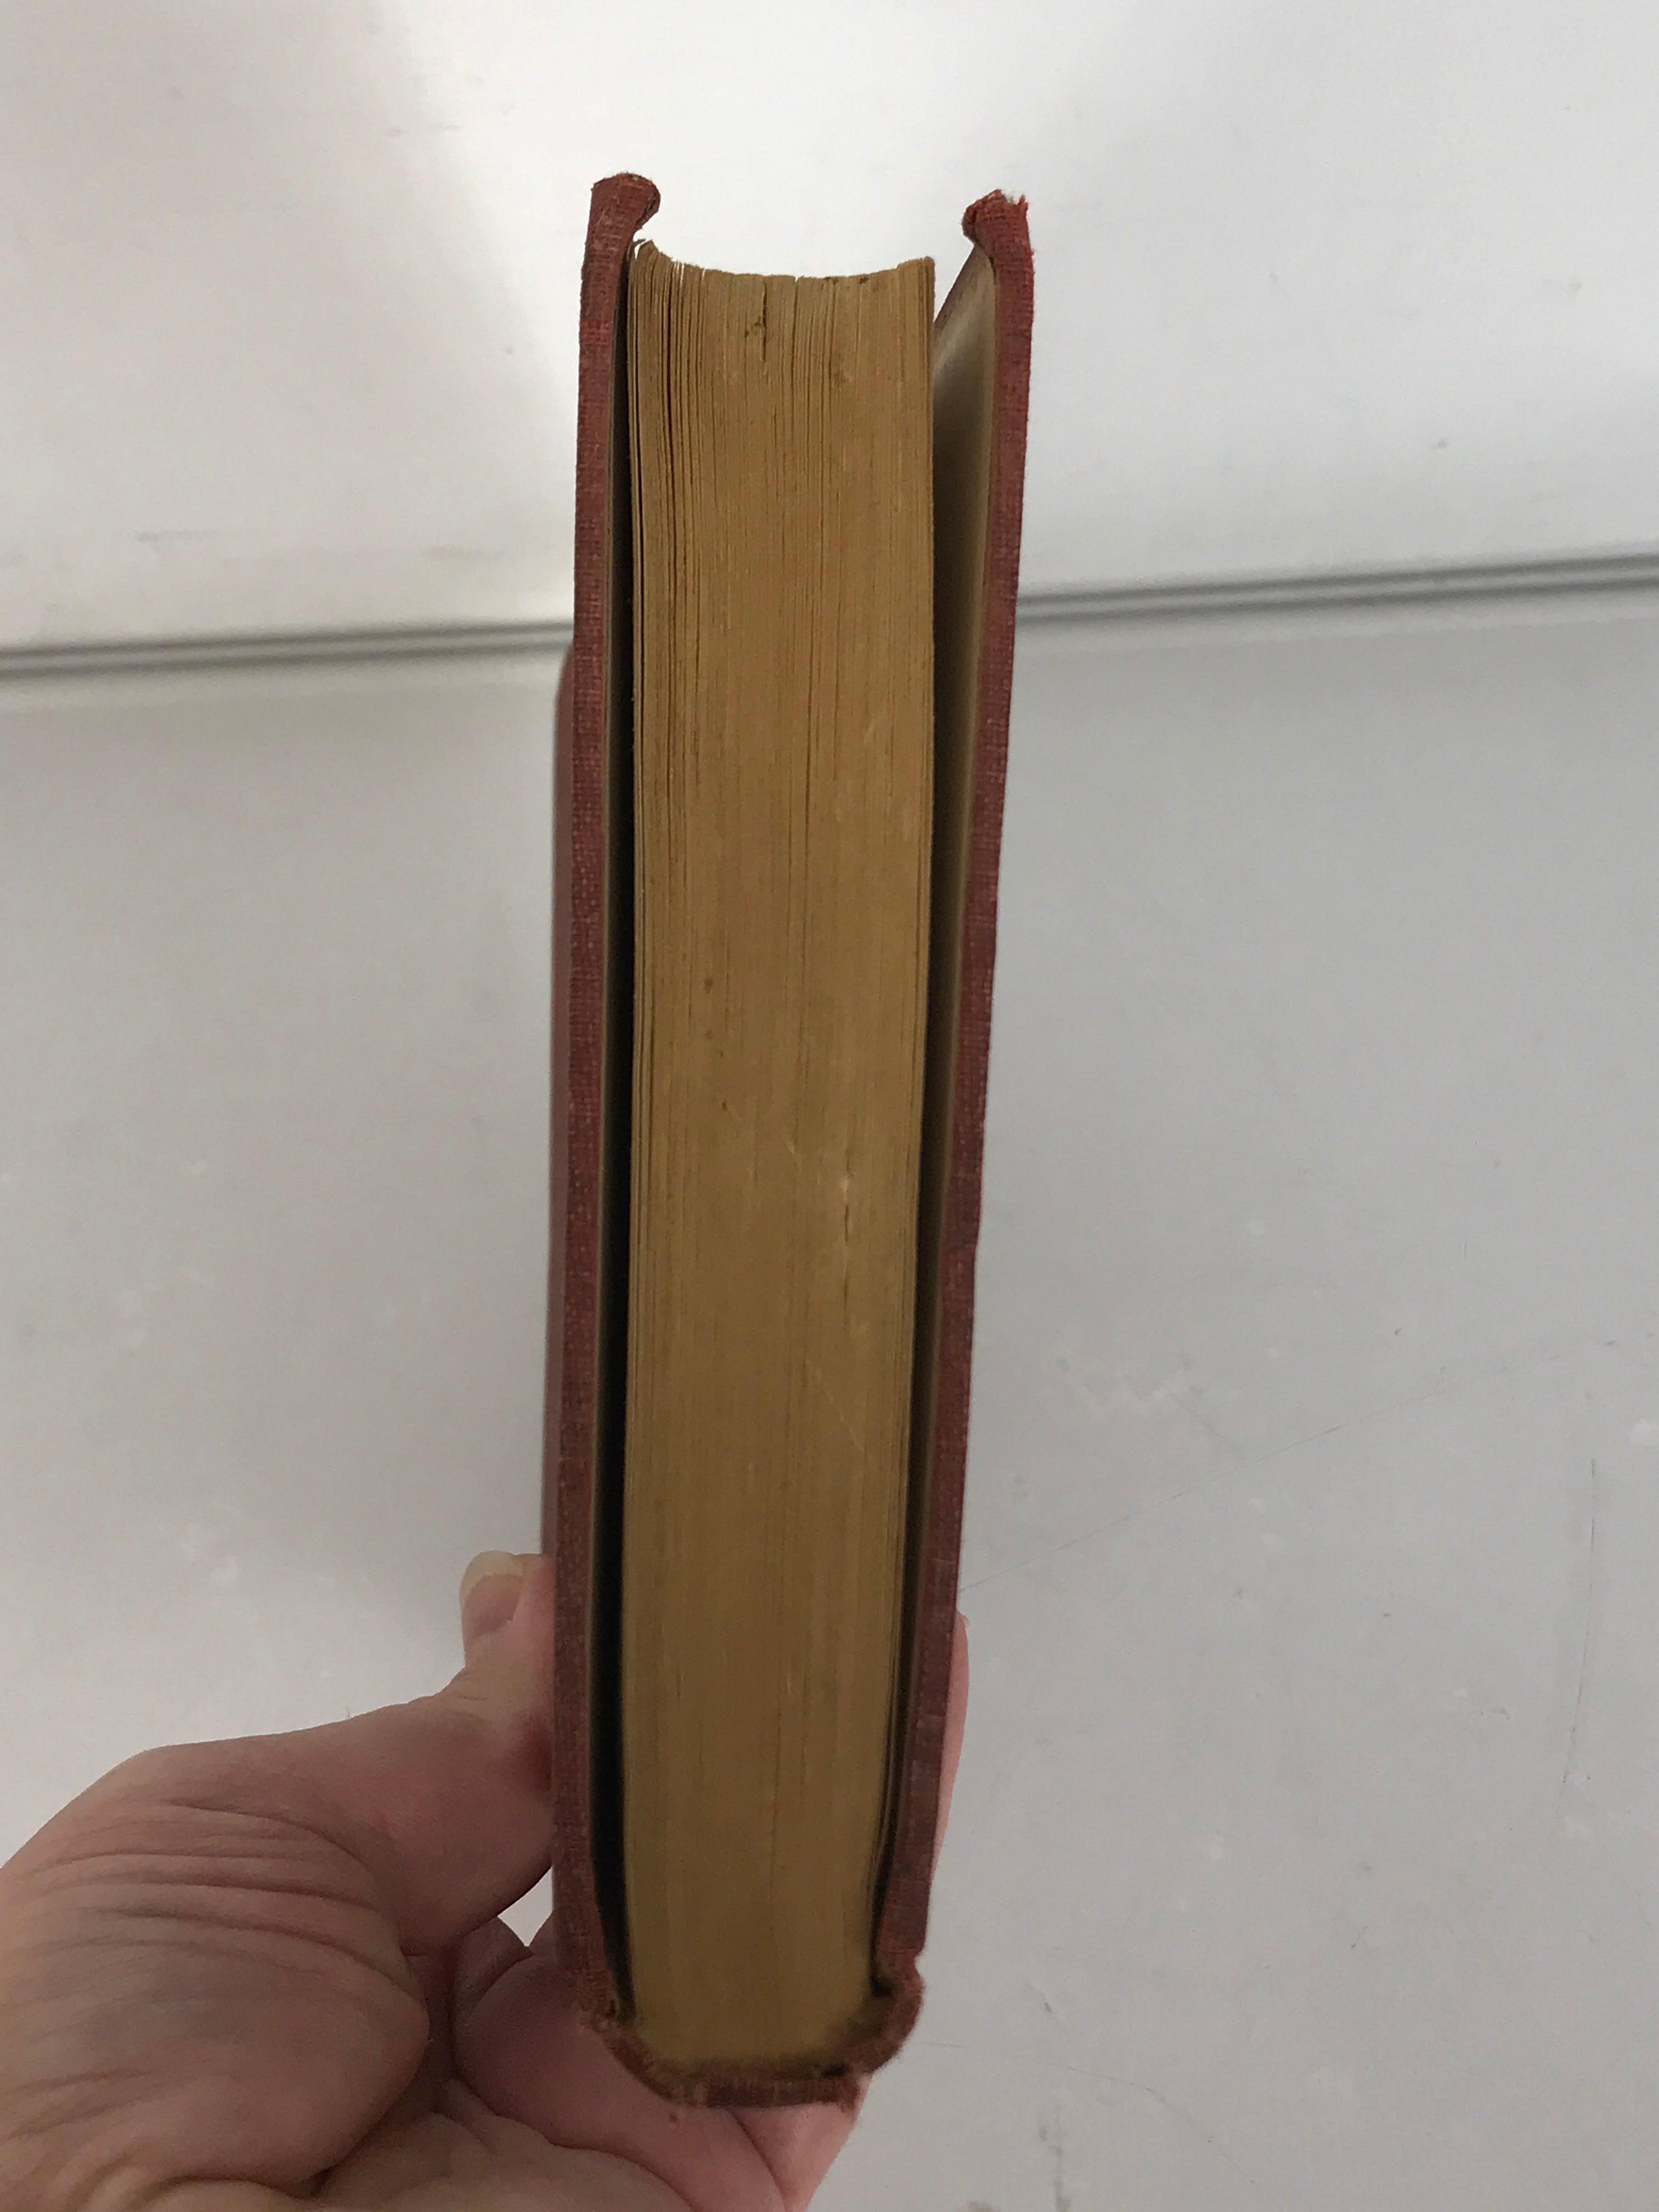 Rare First Edition Bechamp or Pasteur? by E. Douglas Hume 1923 HC